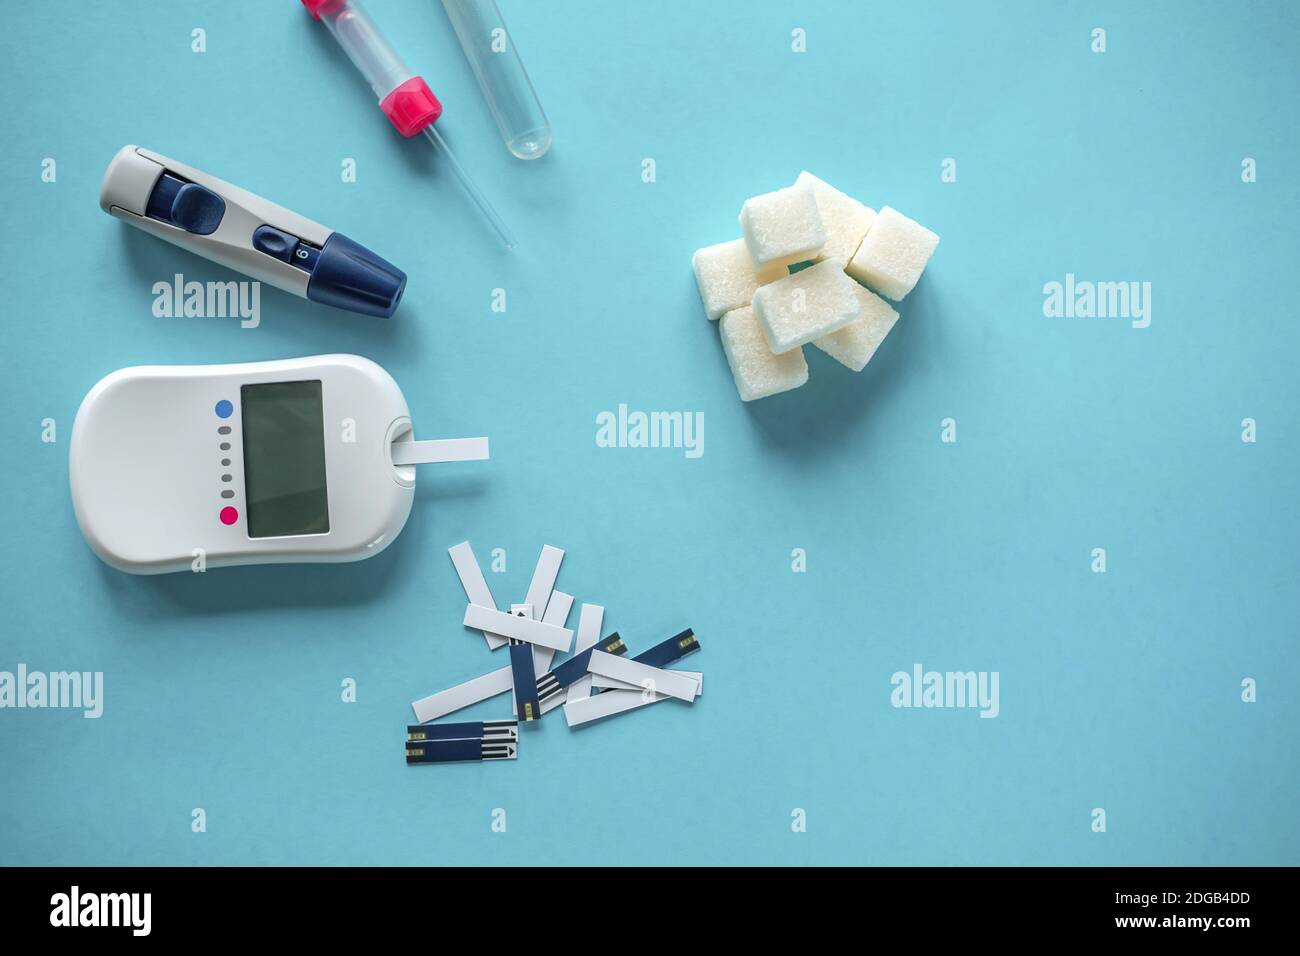 medicine, diabetes diagnostics, healthcare. concept. top view of a blood glucose meter and test strips checking blood sugar levels at home. Stock Photo